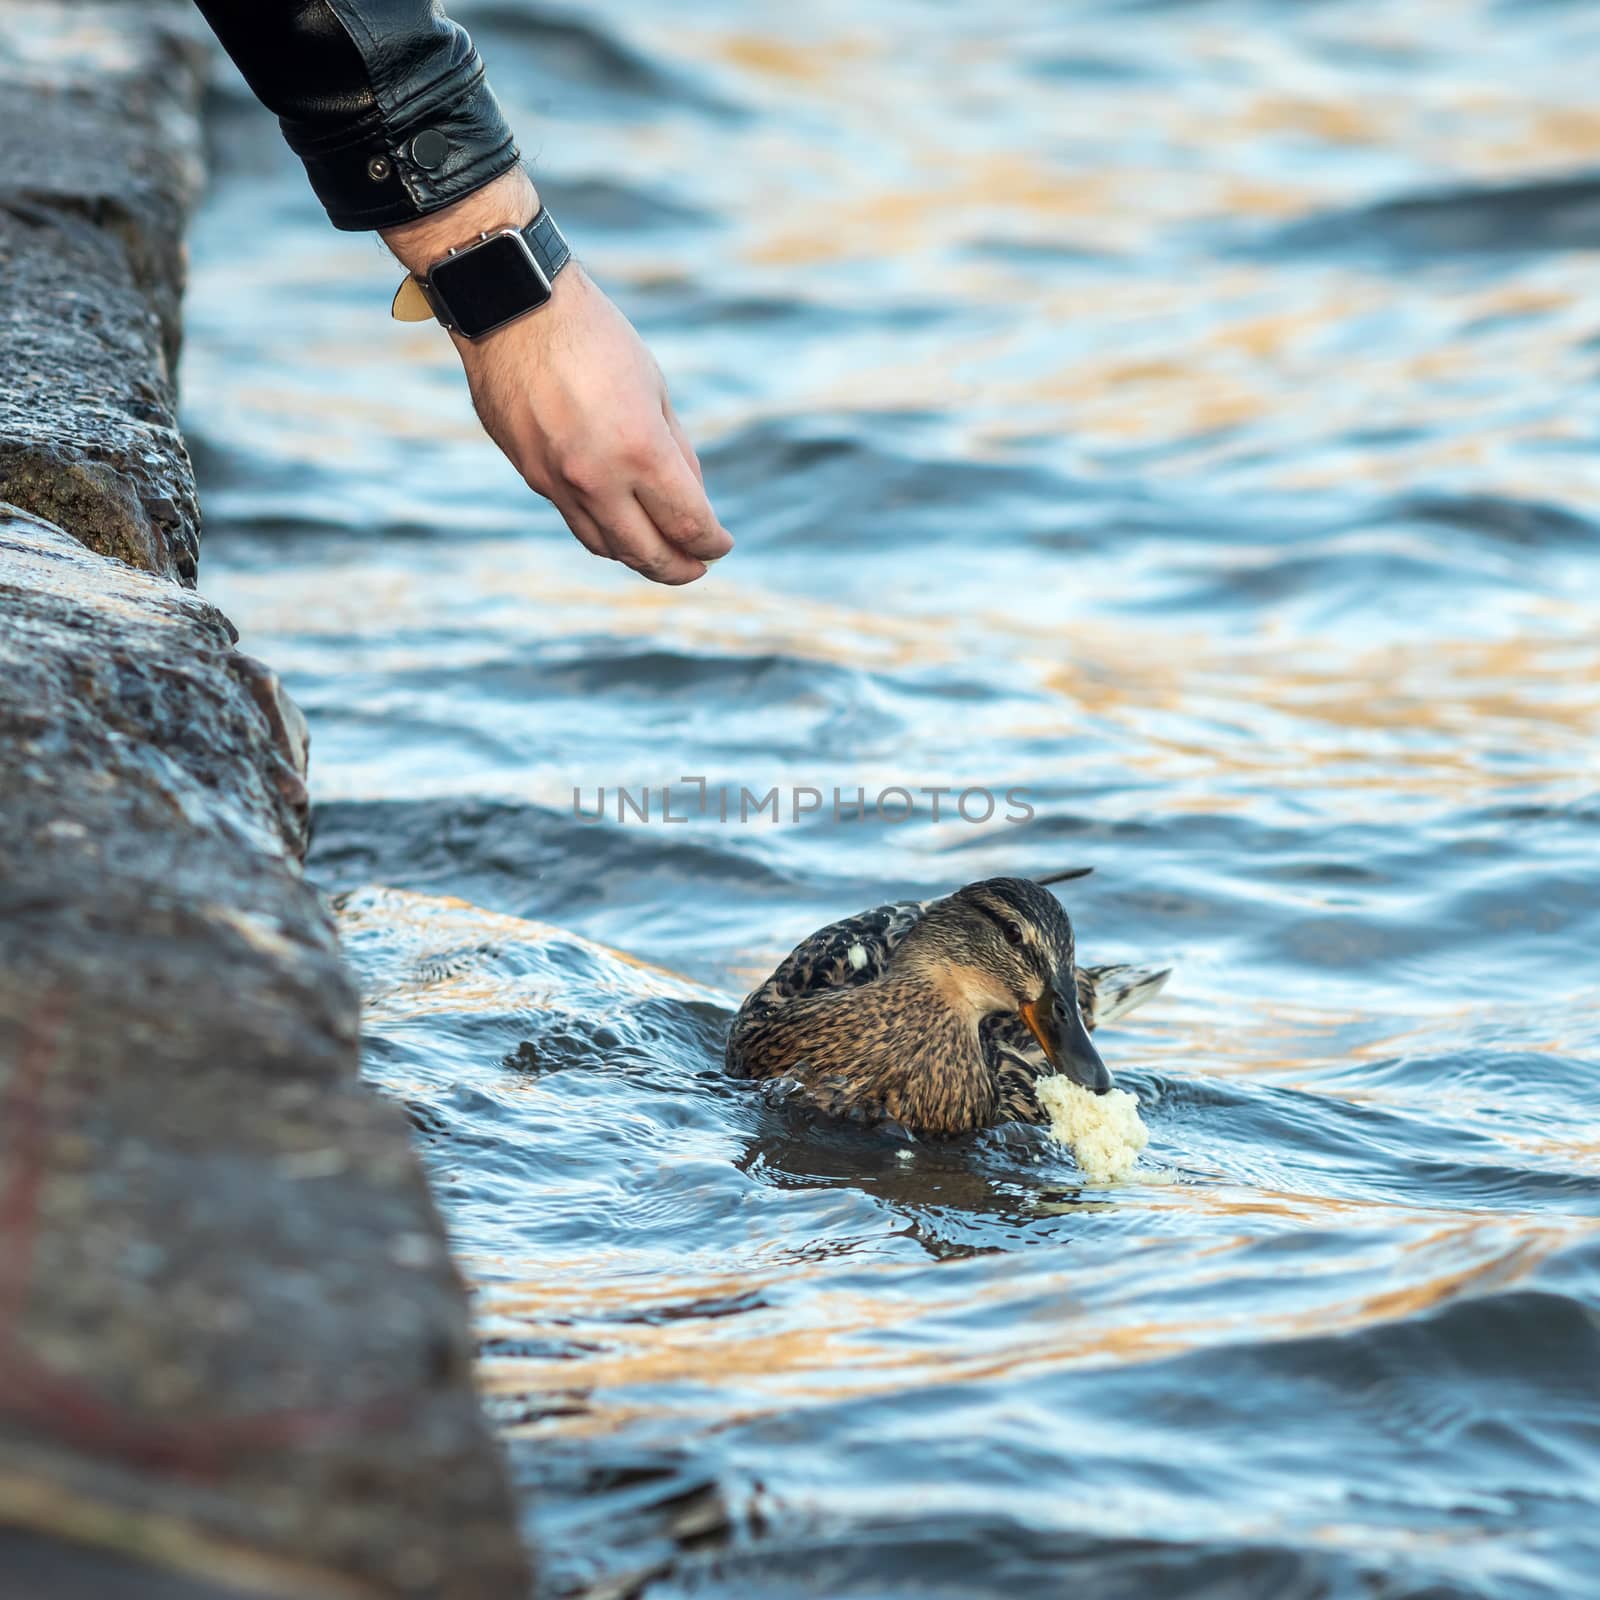 A man feeds a duck from his hand by sveter